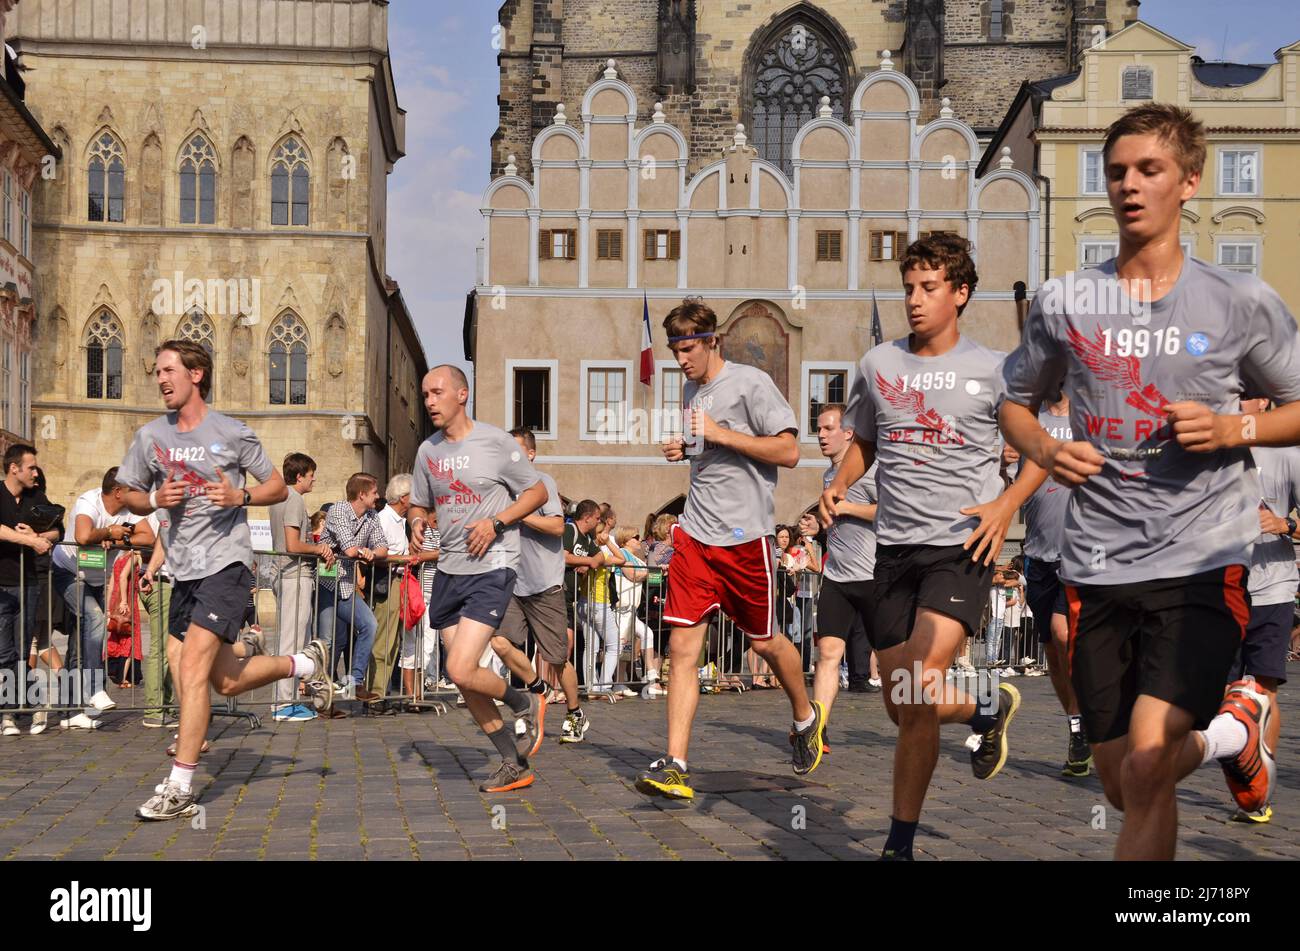 We Run Prague 2013, contestants at annual running competition in Old Town of Prague Czech Republic. Stock Photo